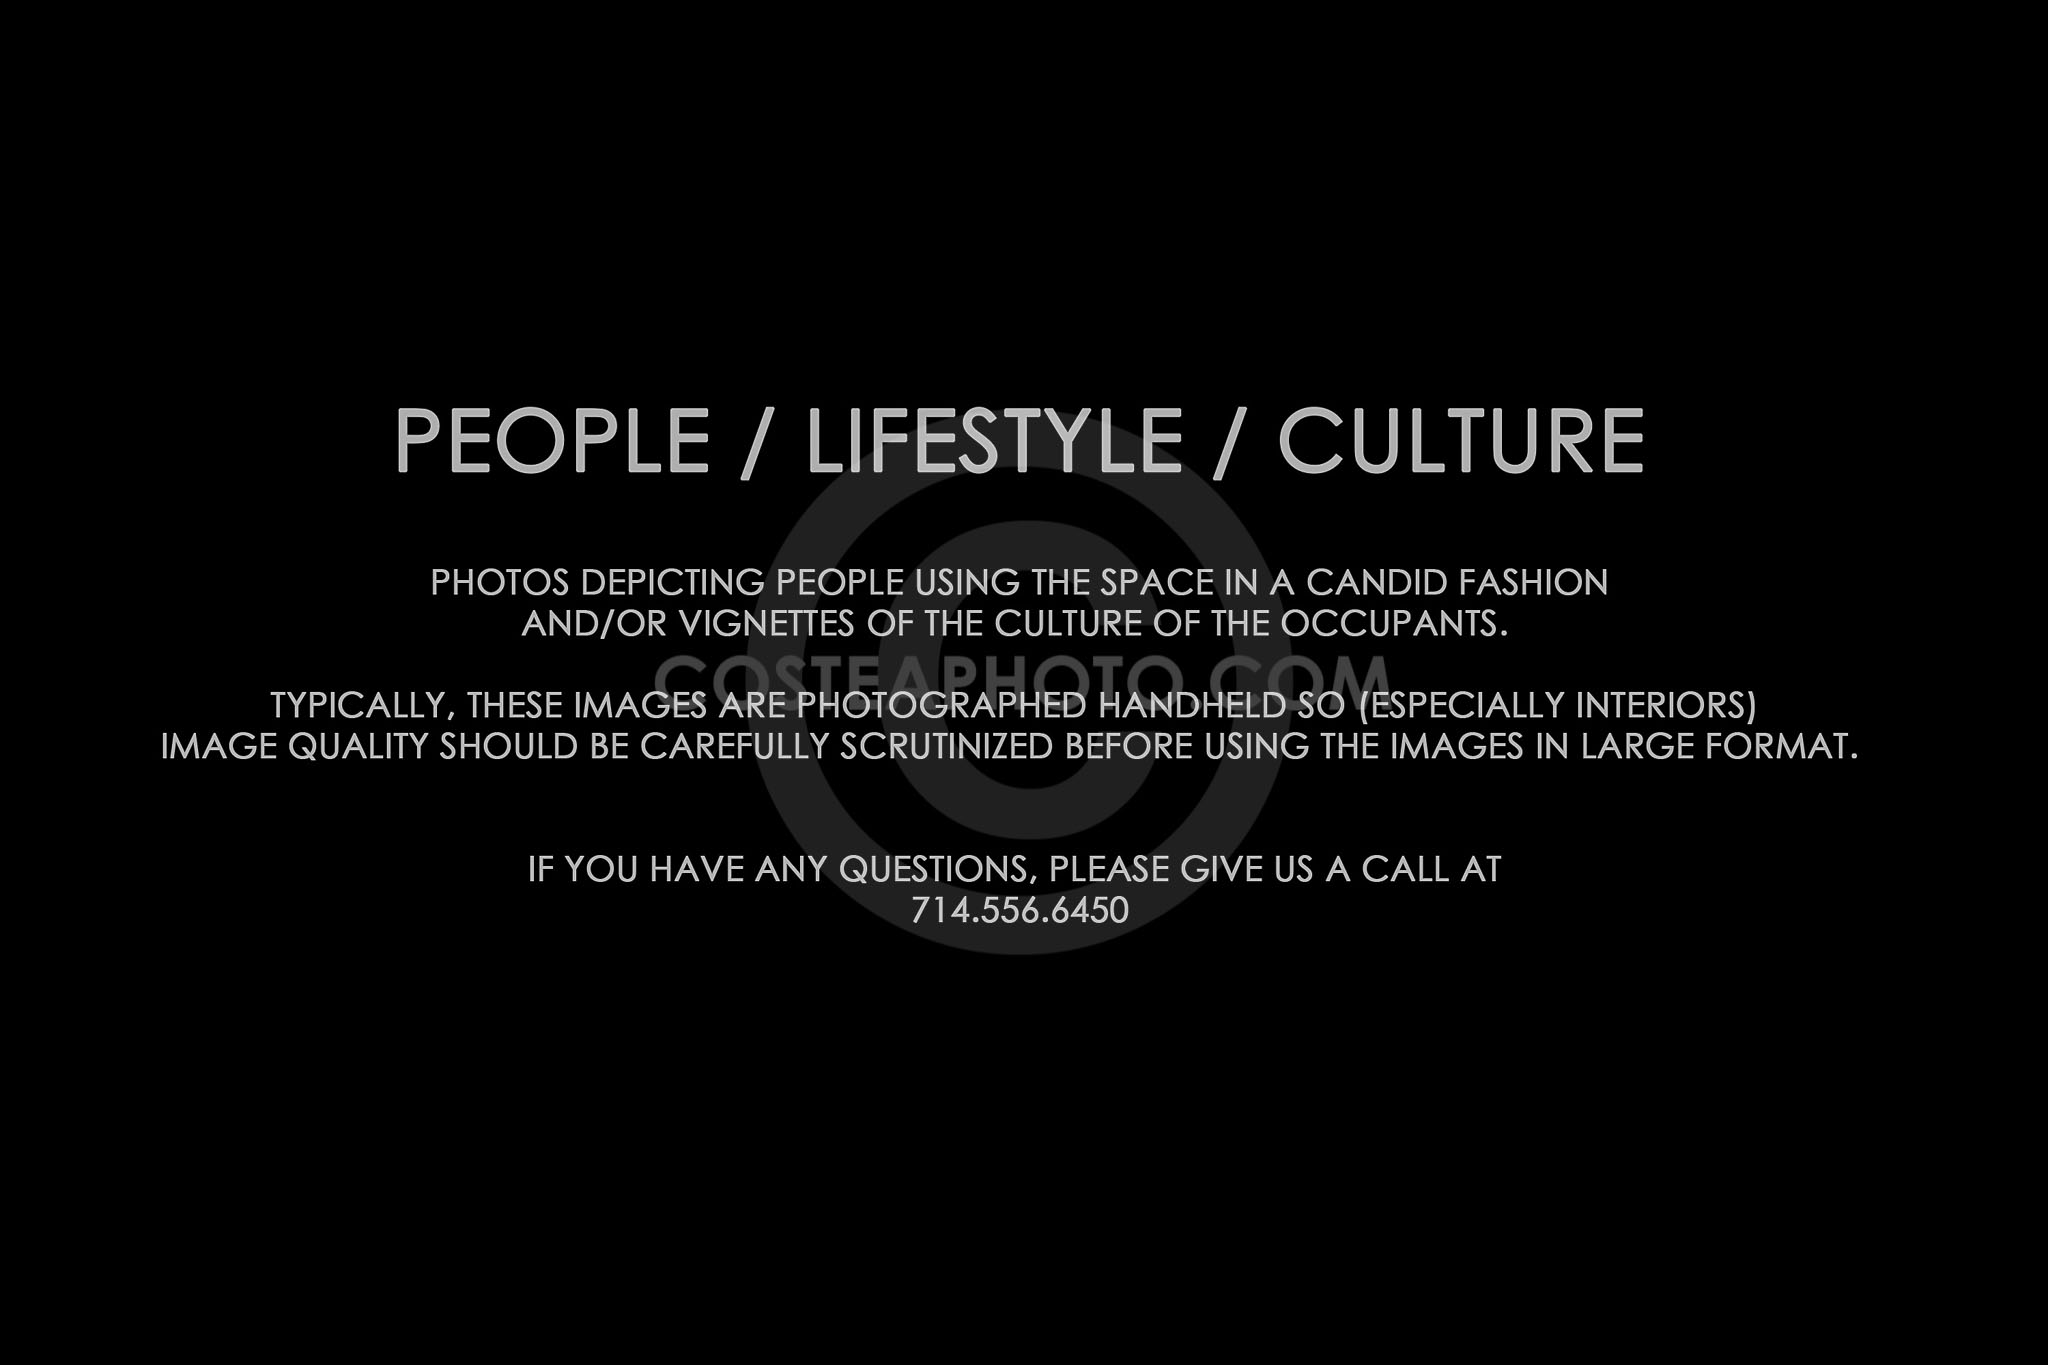 (113) TITLE PAGE - PEOPLE LIFESTYLE